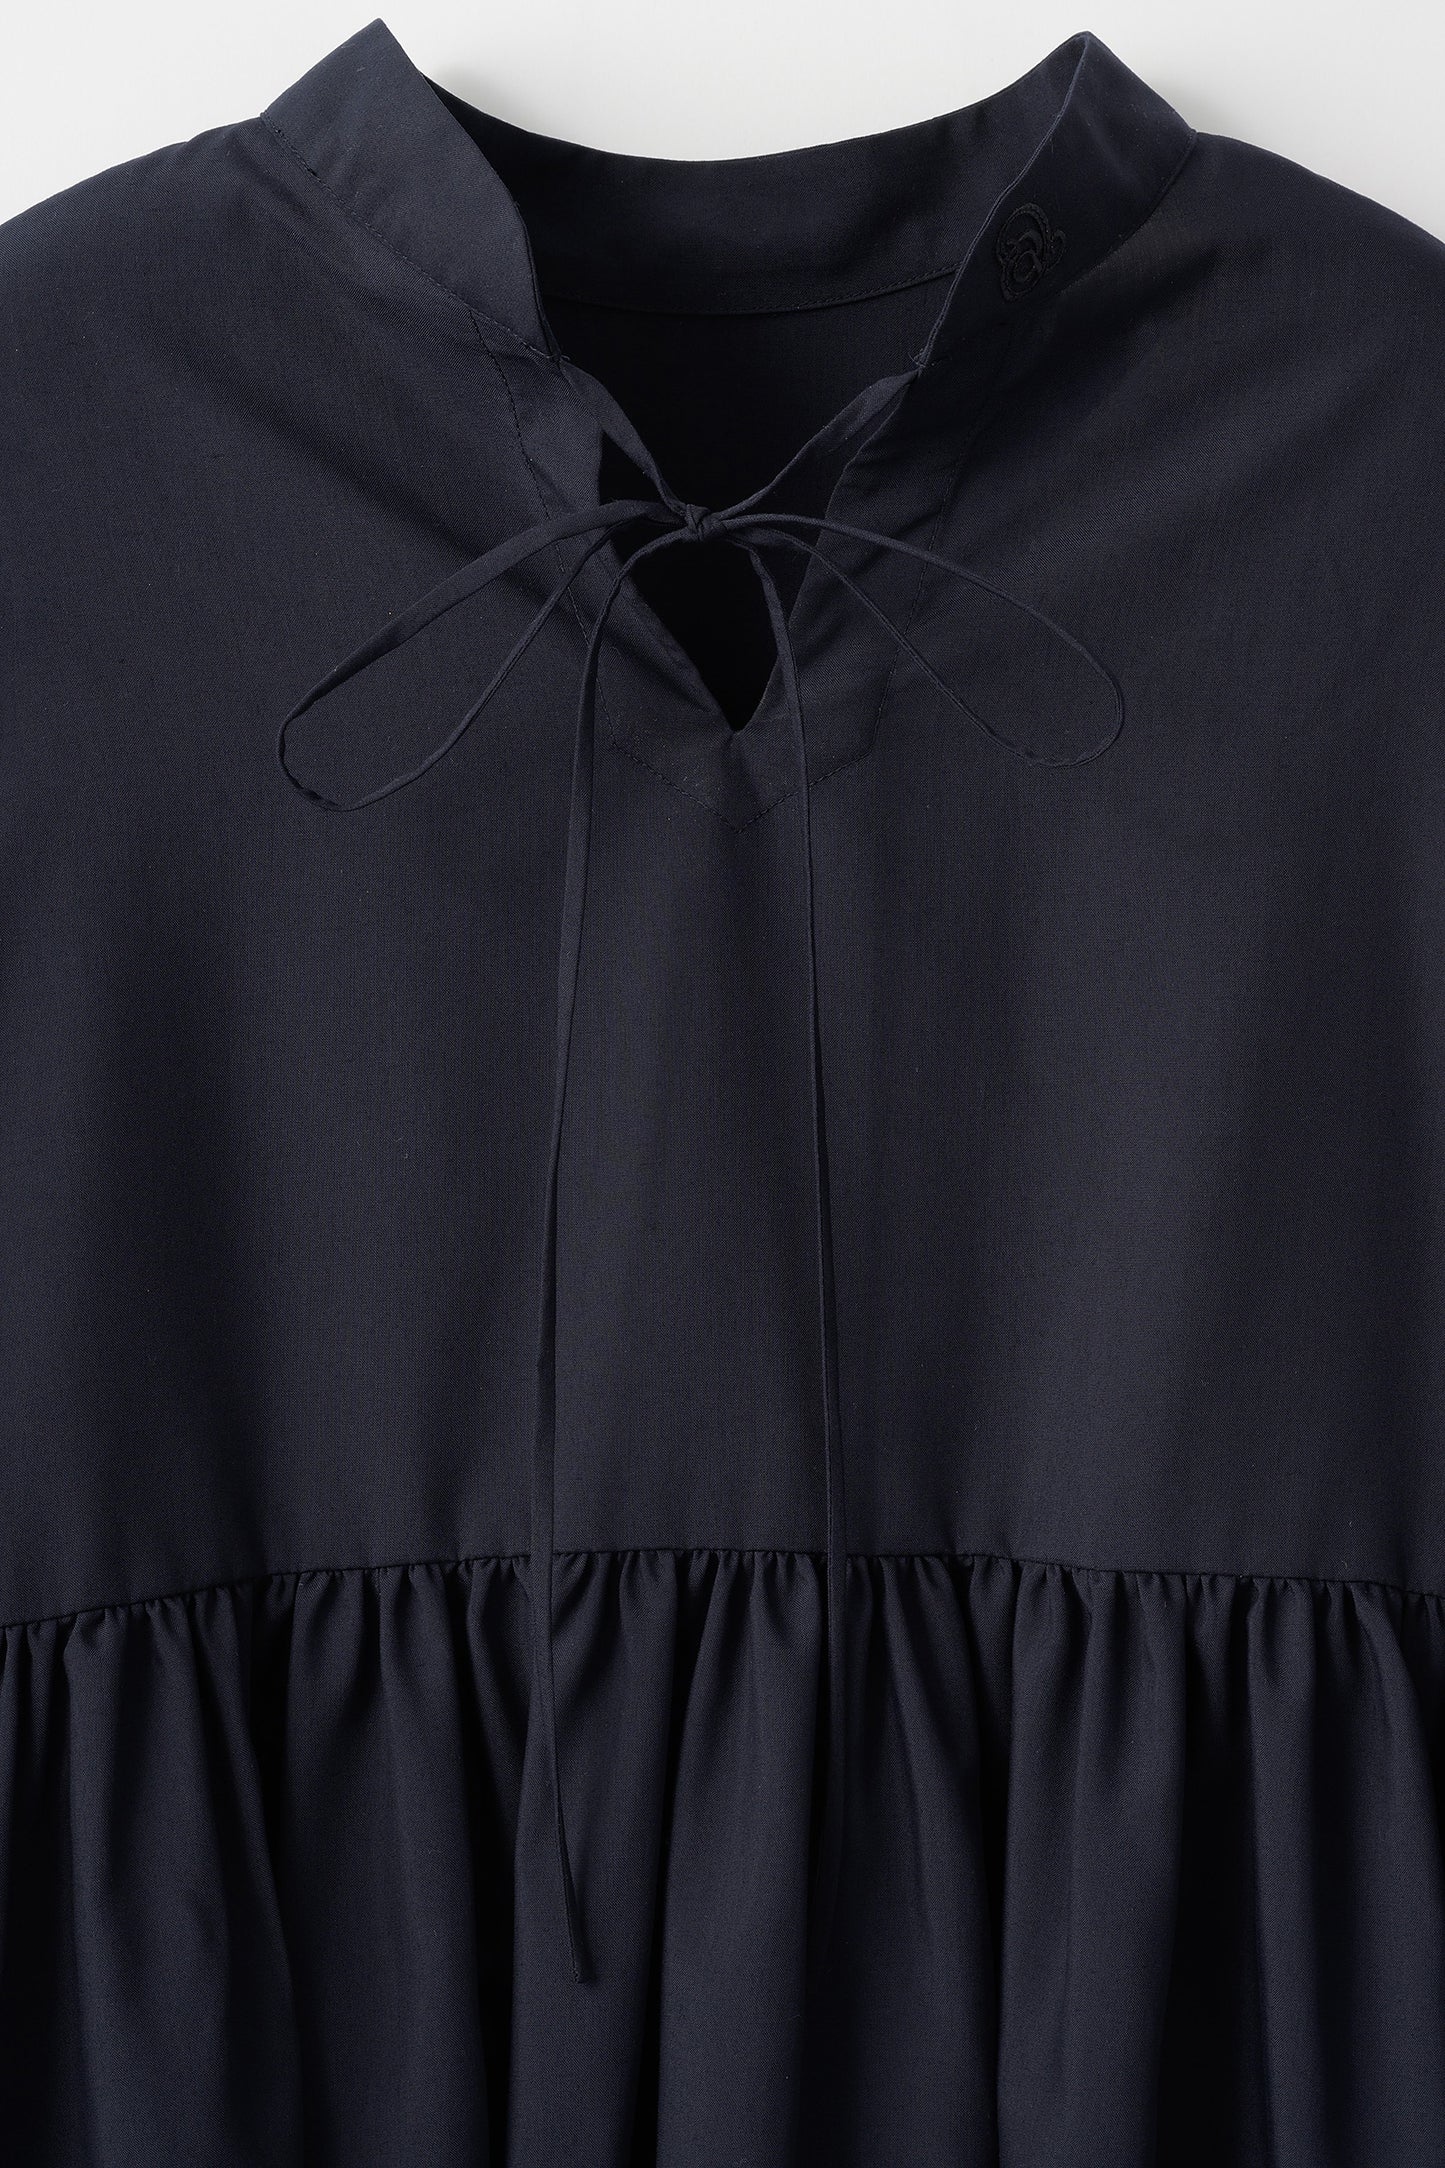 Audire switch blouse (Navy)